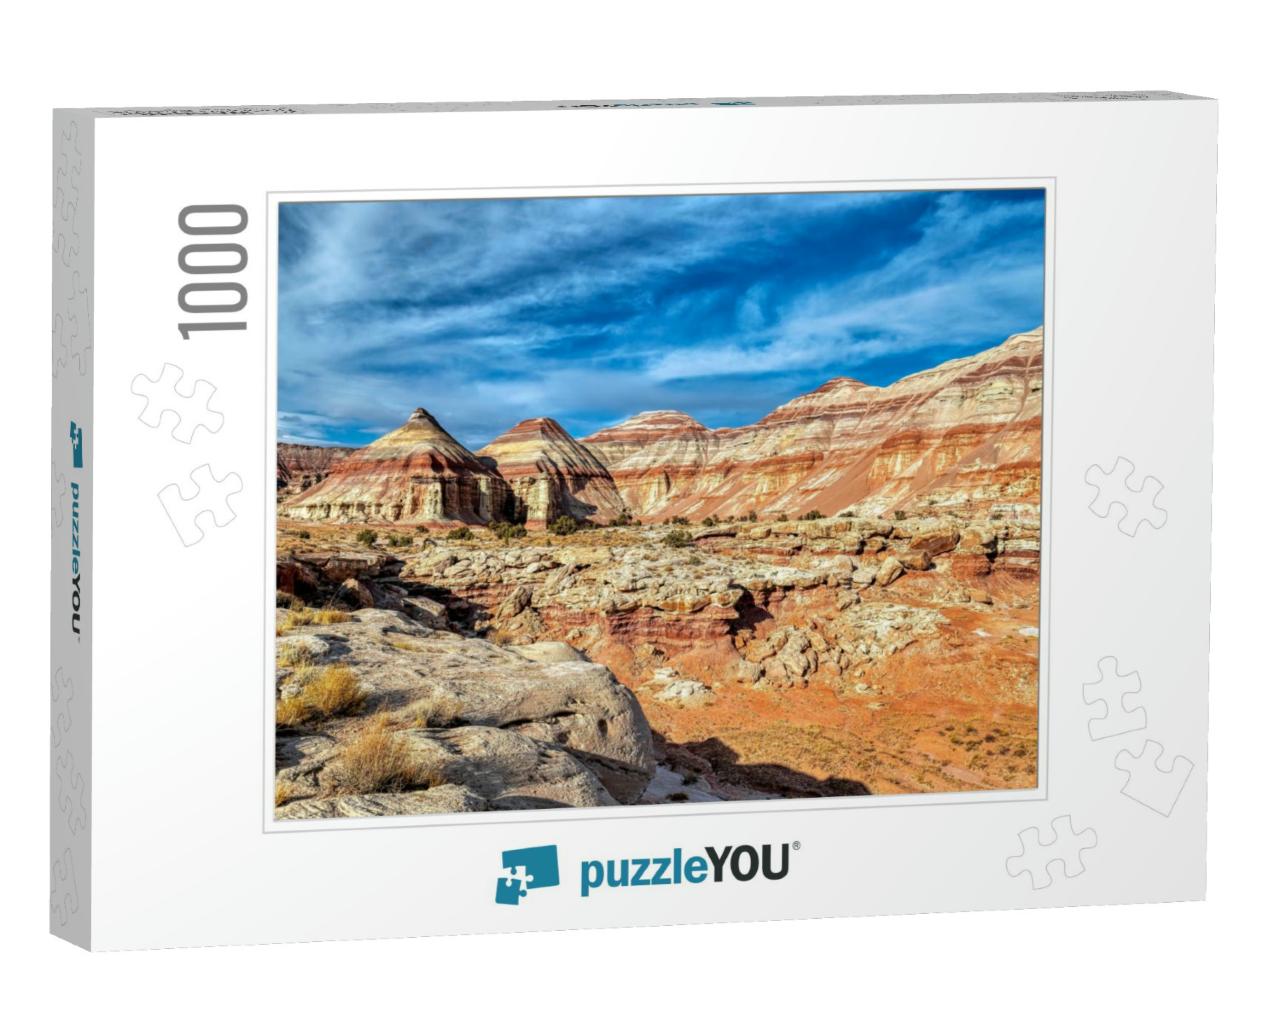 View in Capitol Reef National Park Near Torrey, Utah... Jigsaw Puzzle with 1000 pieces